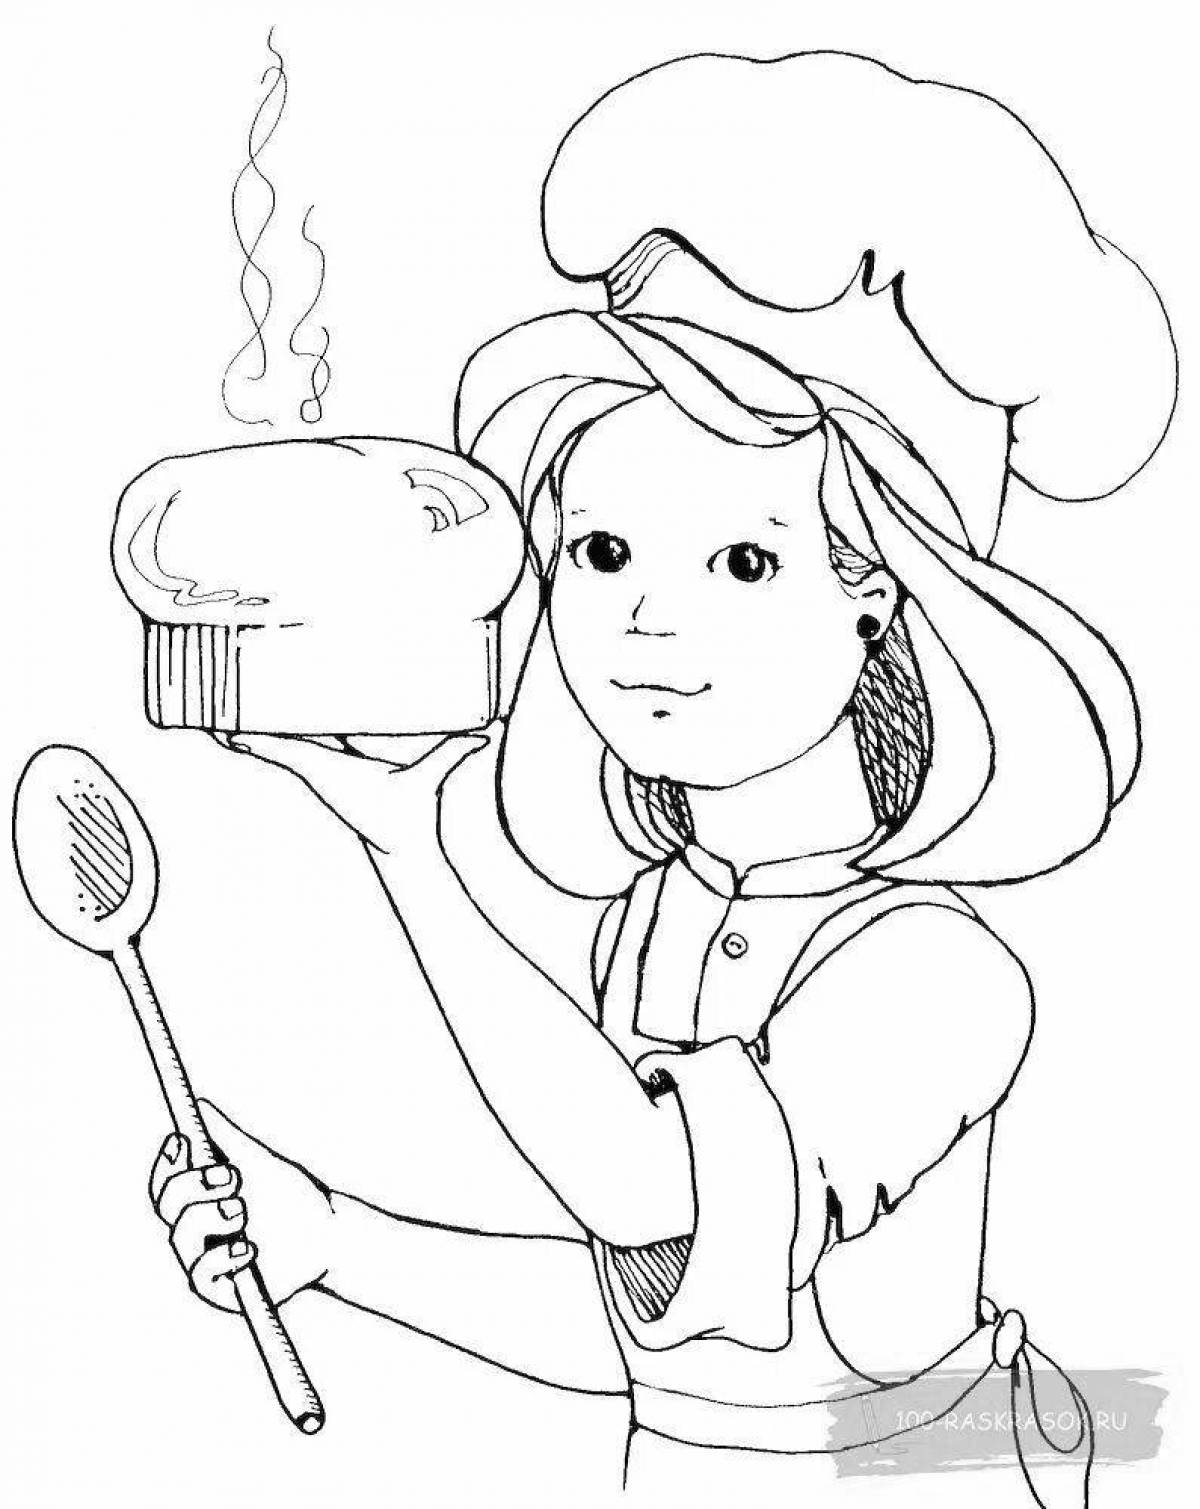 Coloring page pastry chef obsessed with flowers